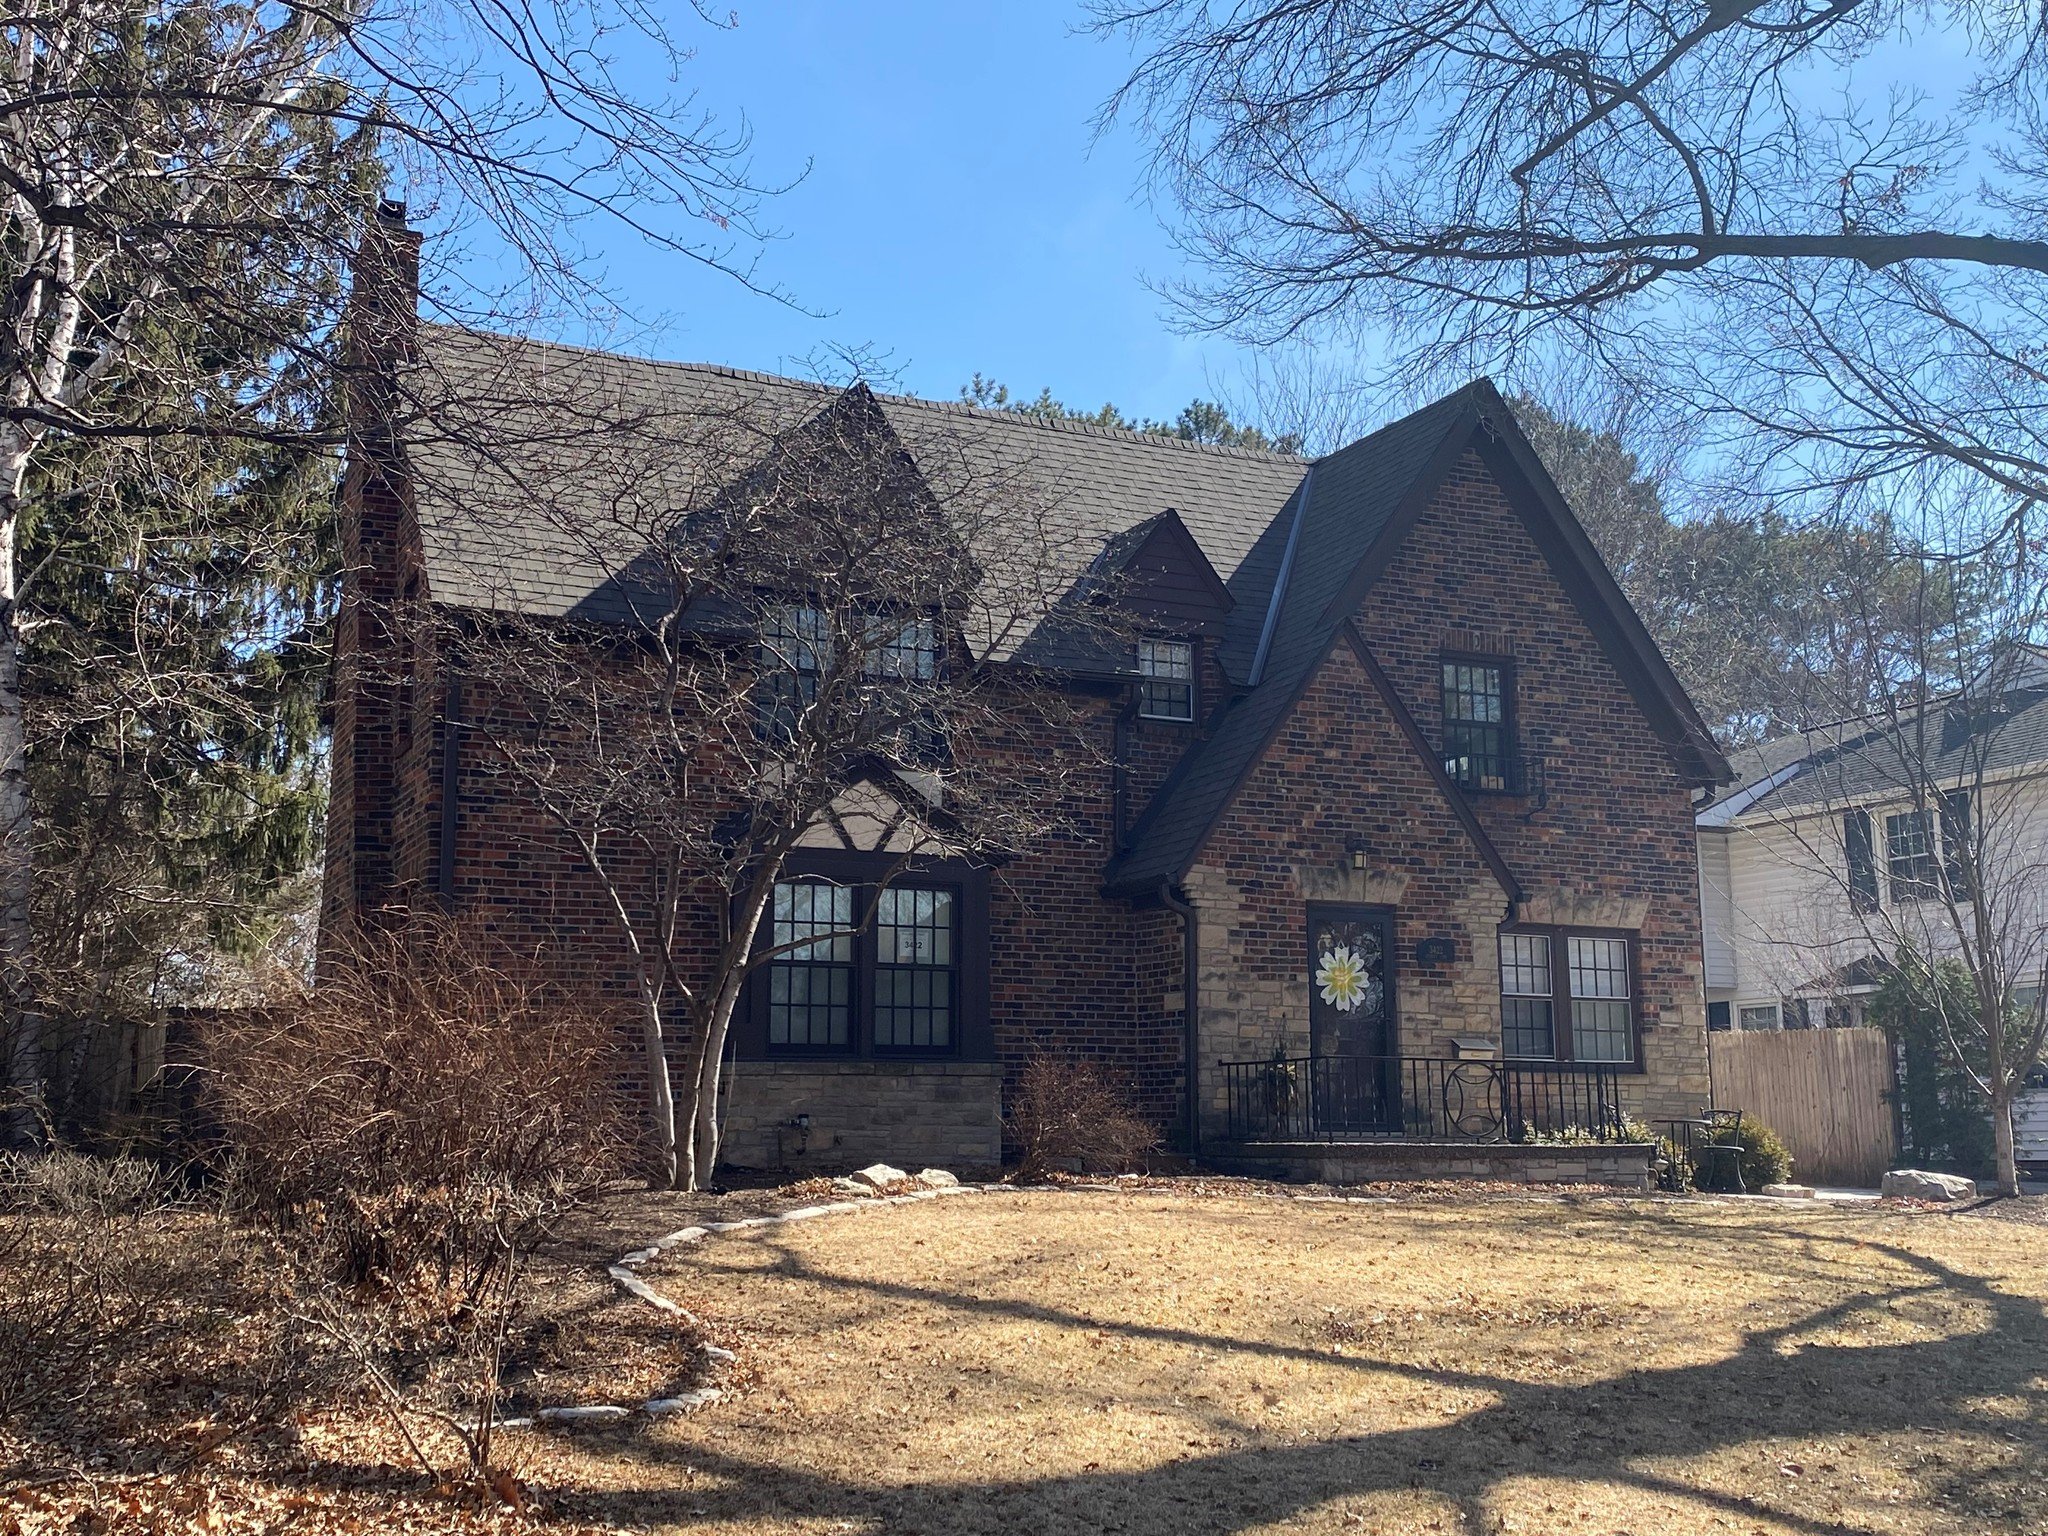 Known as the Caplan-Mohr House, this is one of two locally landmarked homes in the Woodsshire National Register Historic District. The Caplan House is significant both as a distinctive example of a Tudor Revival style house of the early 1930s, and al